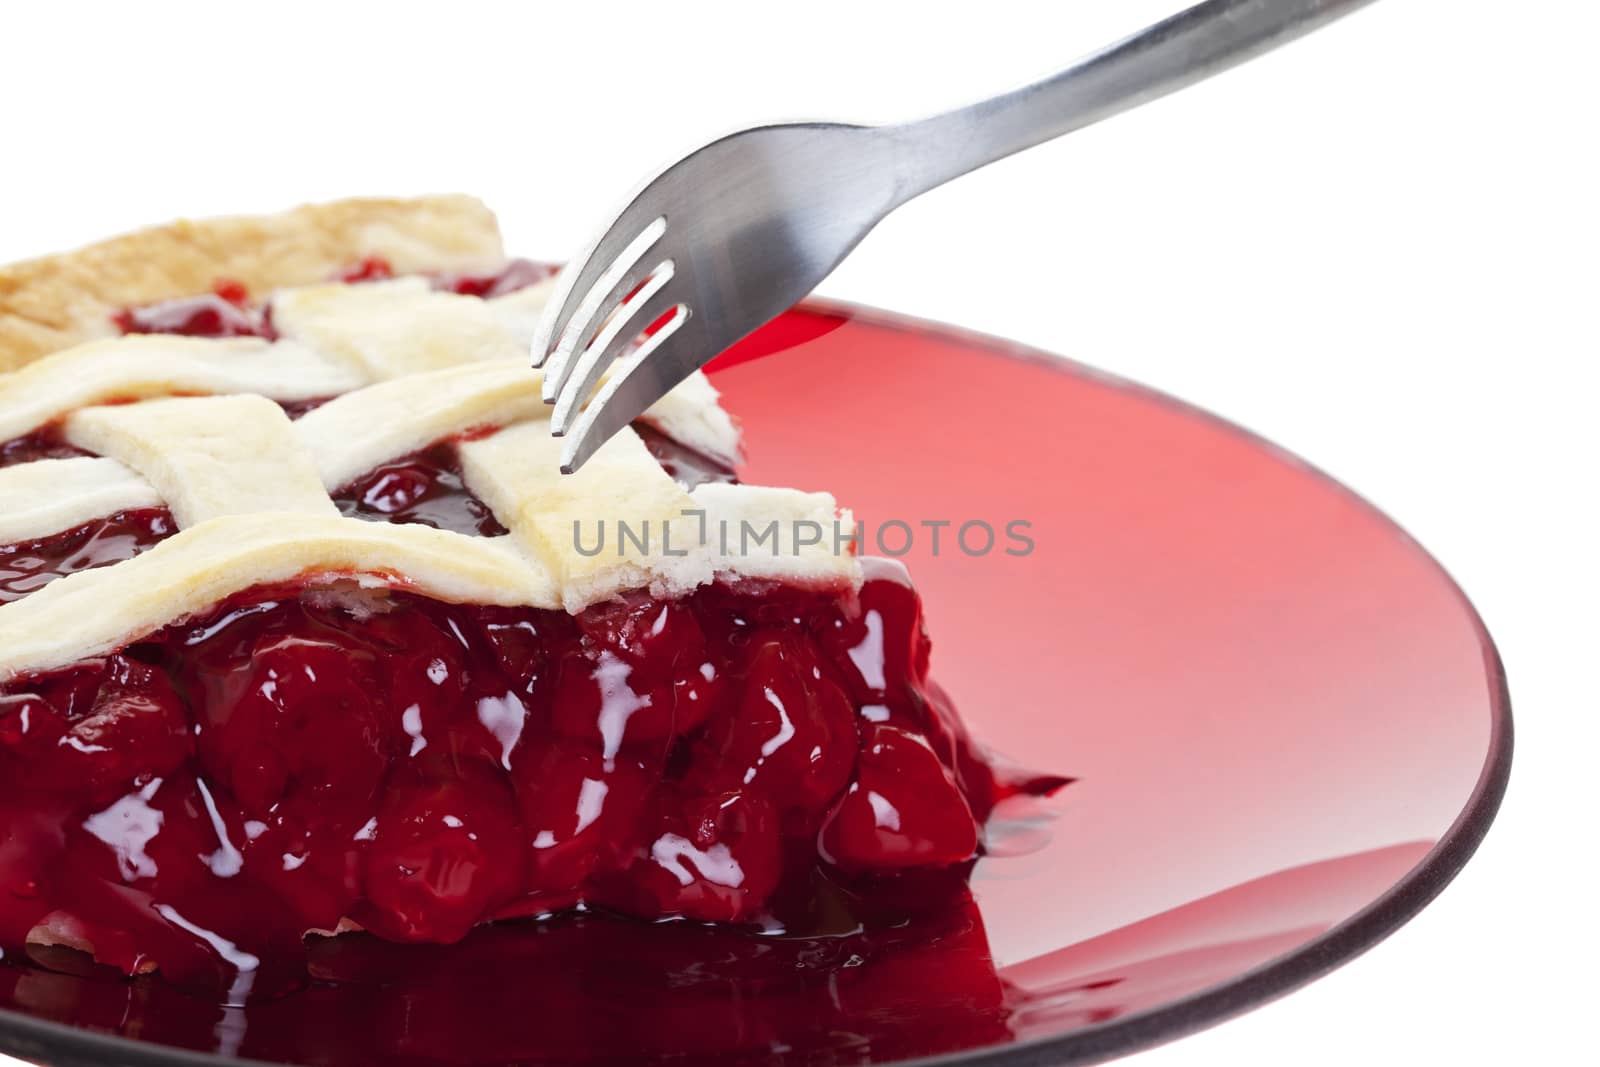 A serving of cherry pie about to be cut into with a fork.  Shot on white background.